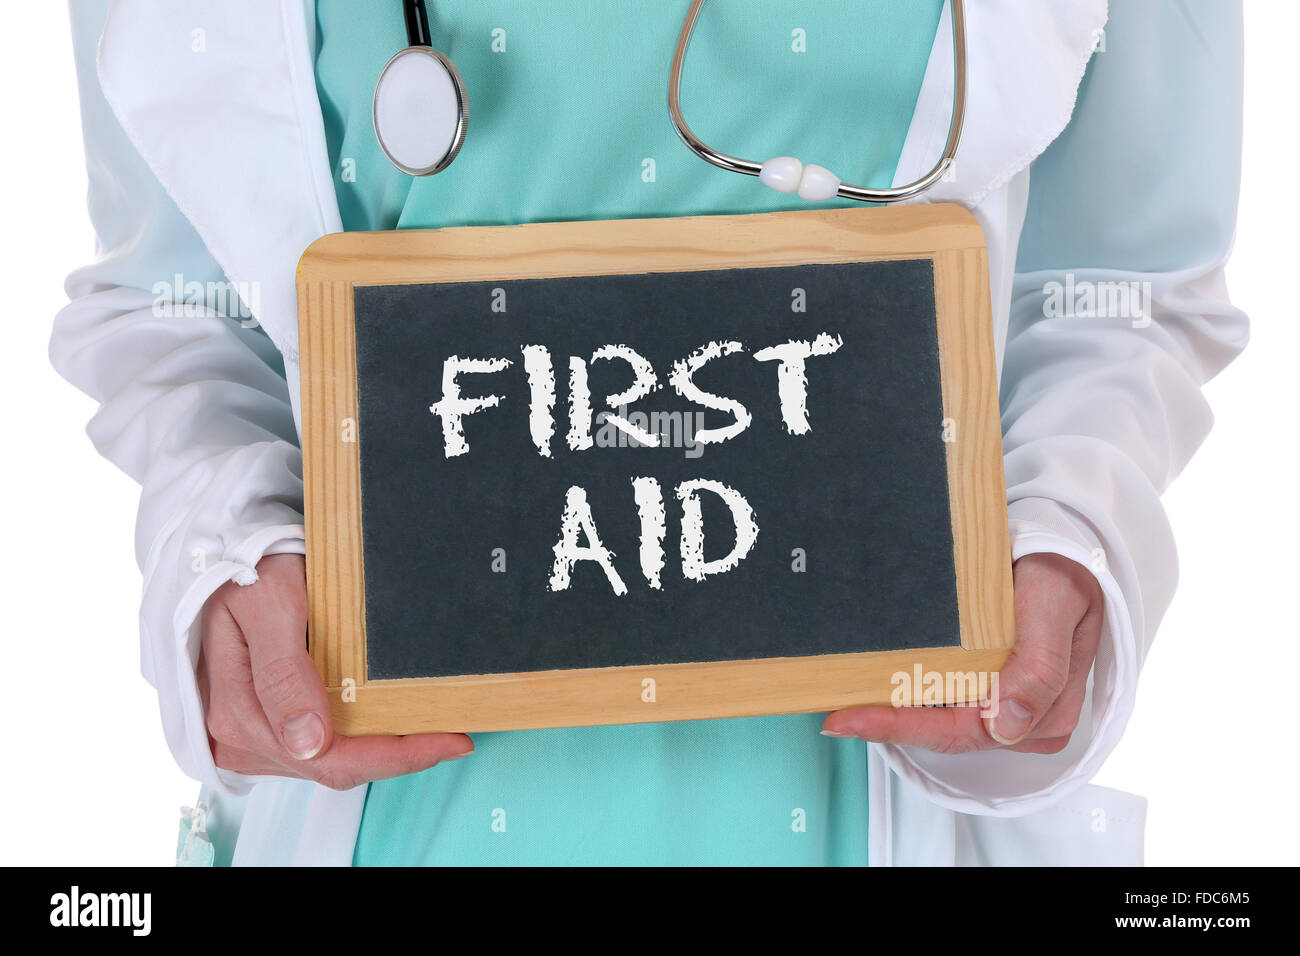 First aid help helping cpr doctor medical accident with sign Stock Photo